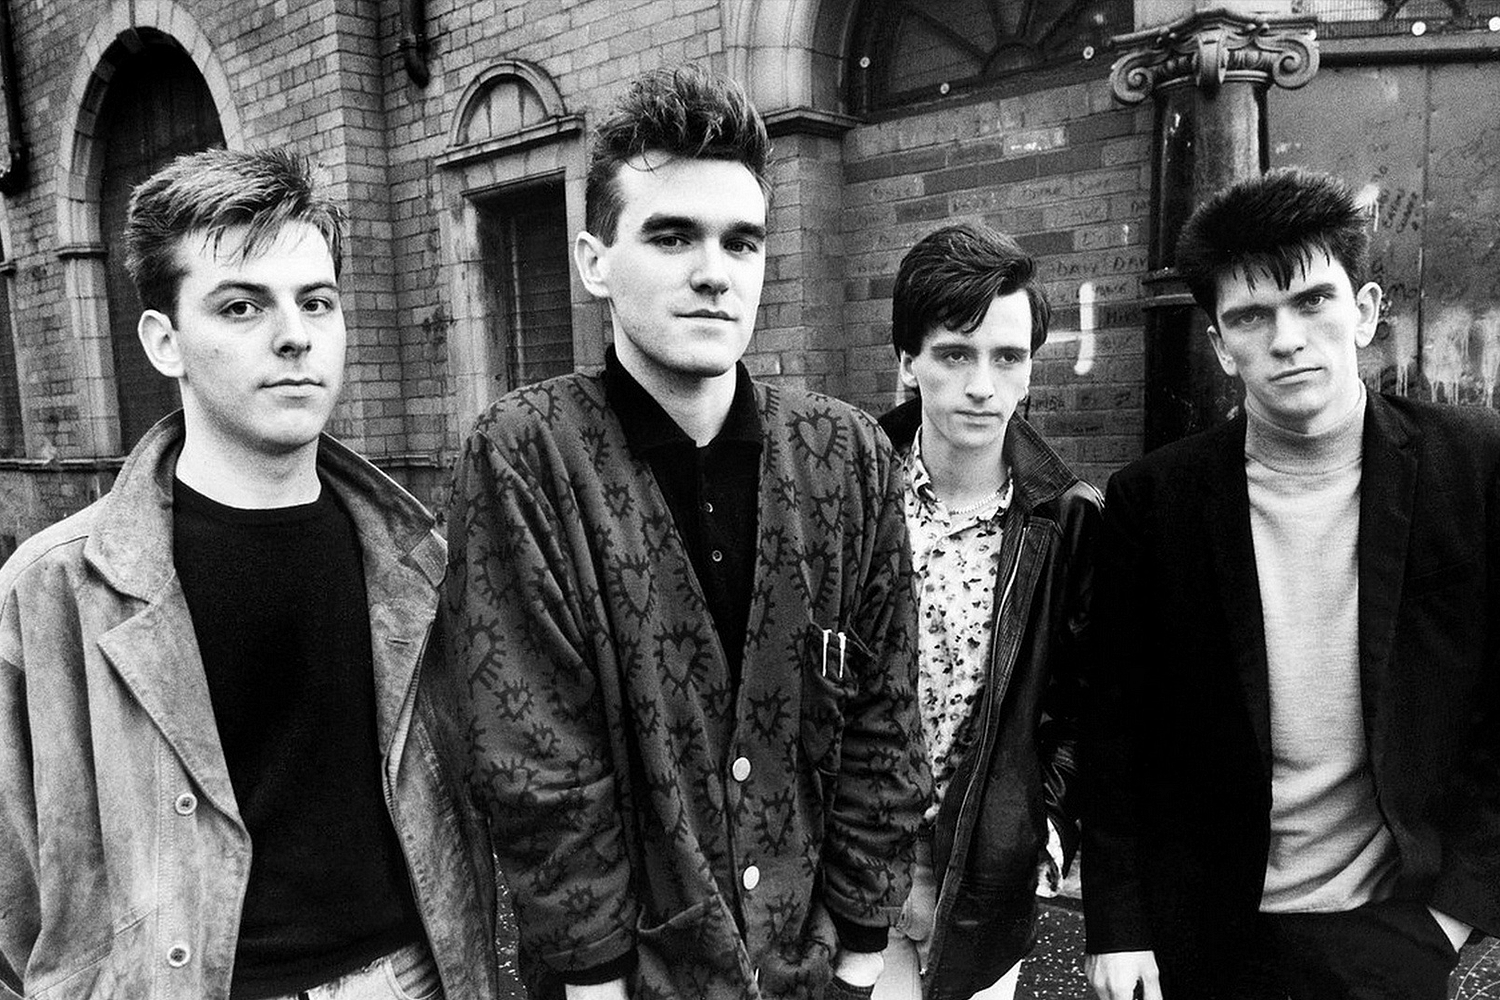 The Smiths nearly reunited in 2008